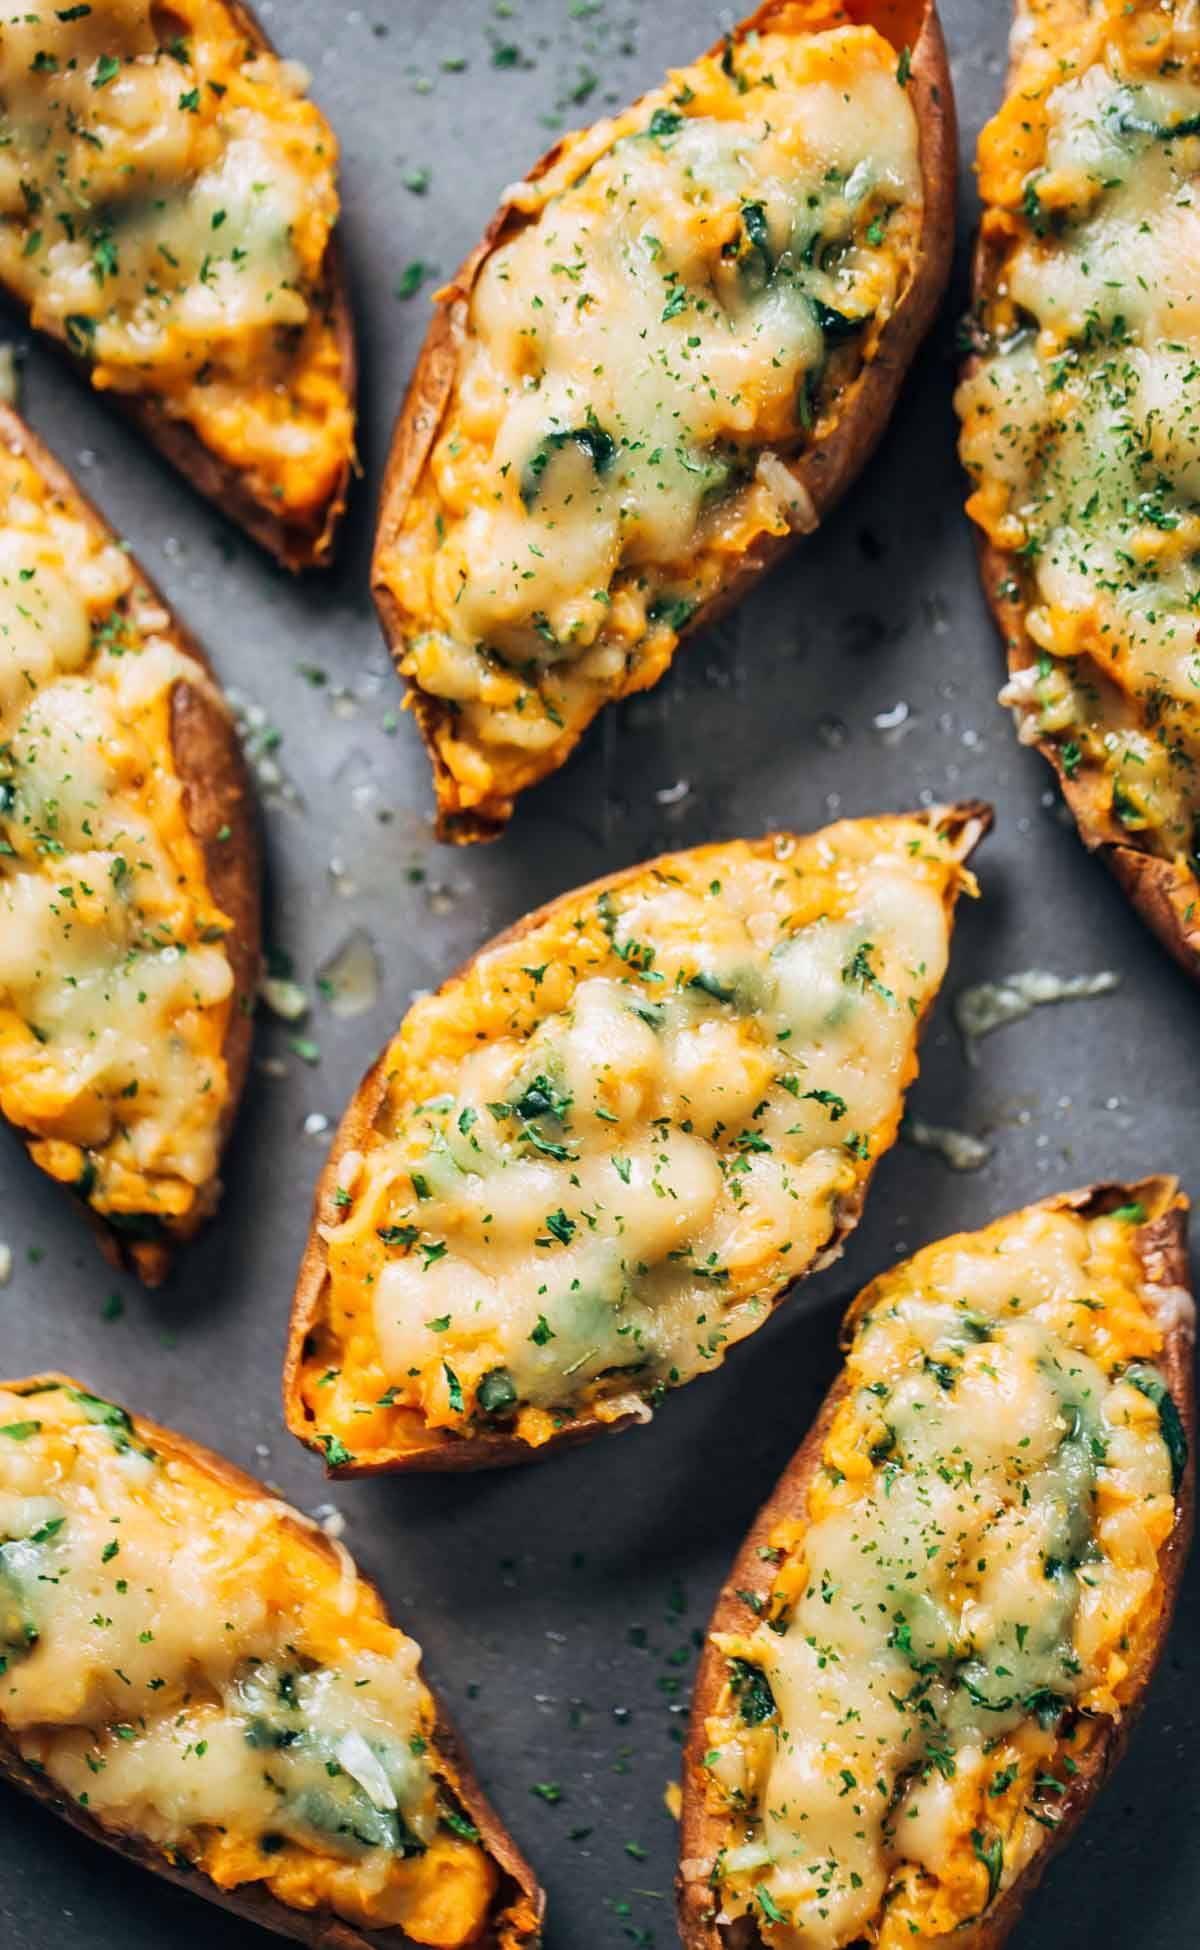 Healthy Sweet Potato Skins - a vegetarian recipe featuring sweet potatoes, spinach, and chickpeas! a MUST TRY for sweet potato lovers. | pinchofyum.com